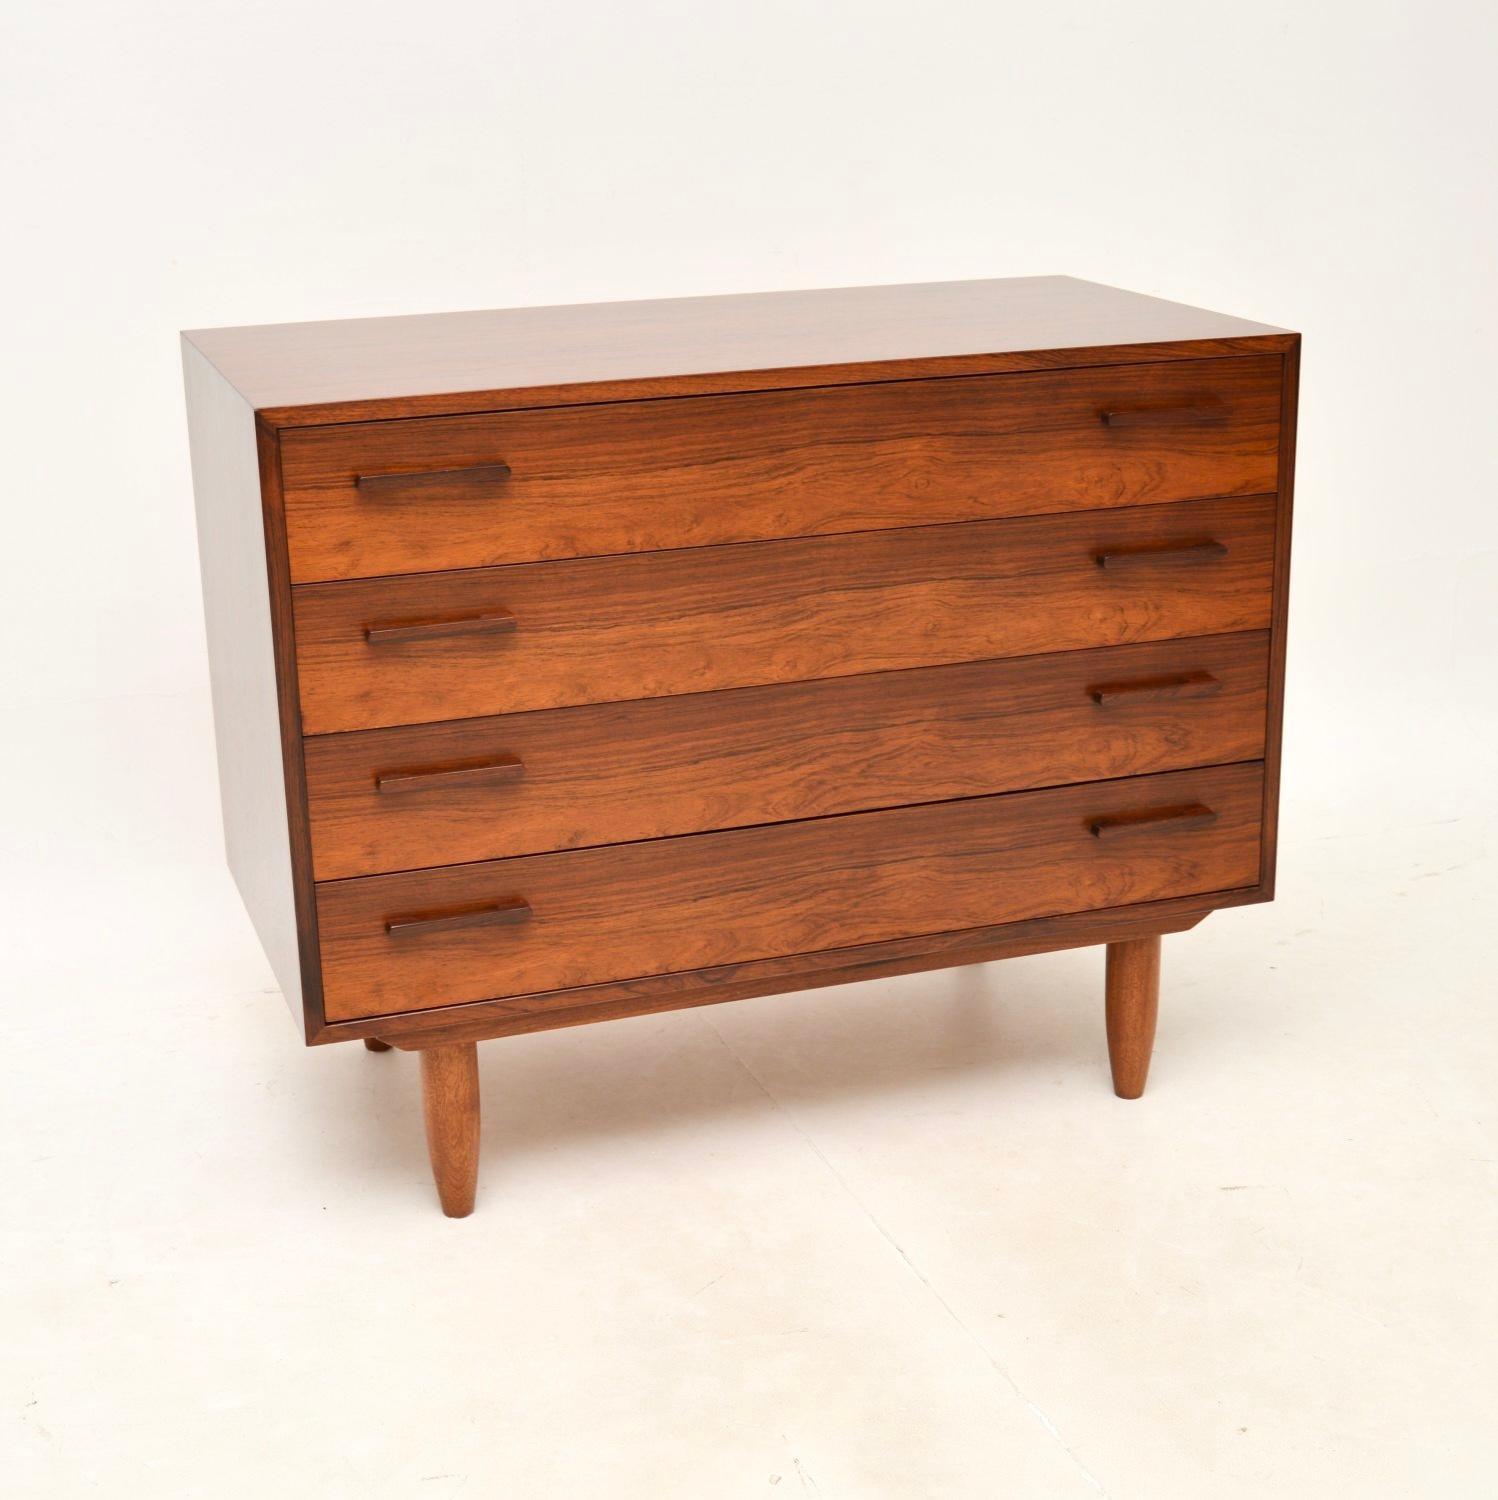 A gorgeous Danish vintage chest of drawers by Kai Kristiansen, made in Denmark in the 1960’s.

It is of superb quality, with a very stylish and practical design. The colour and grain patterns are beautiful, this looks amazing from all angles. It has